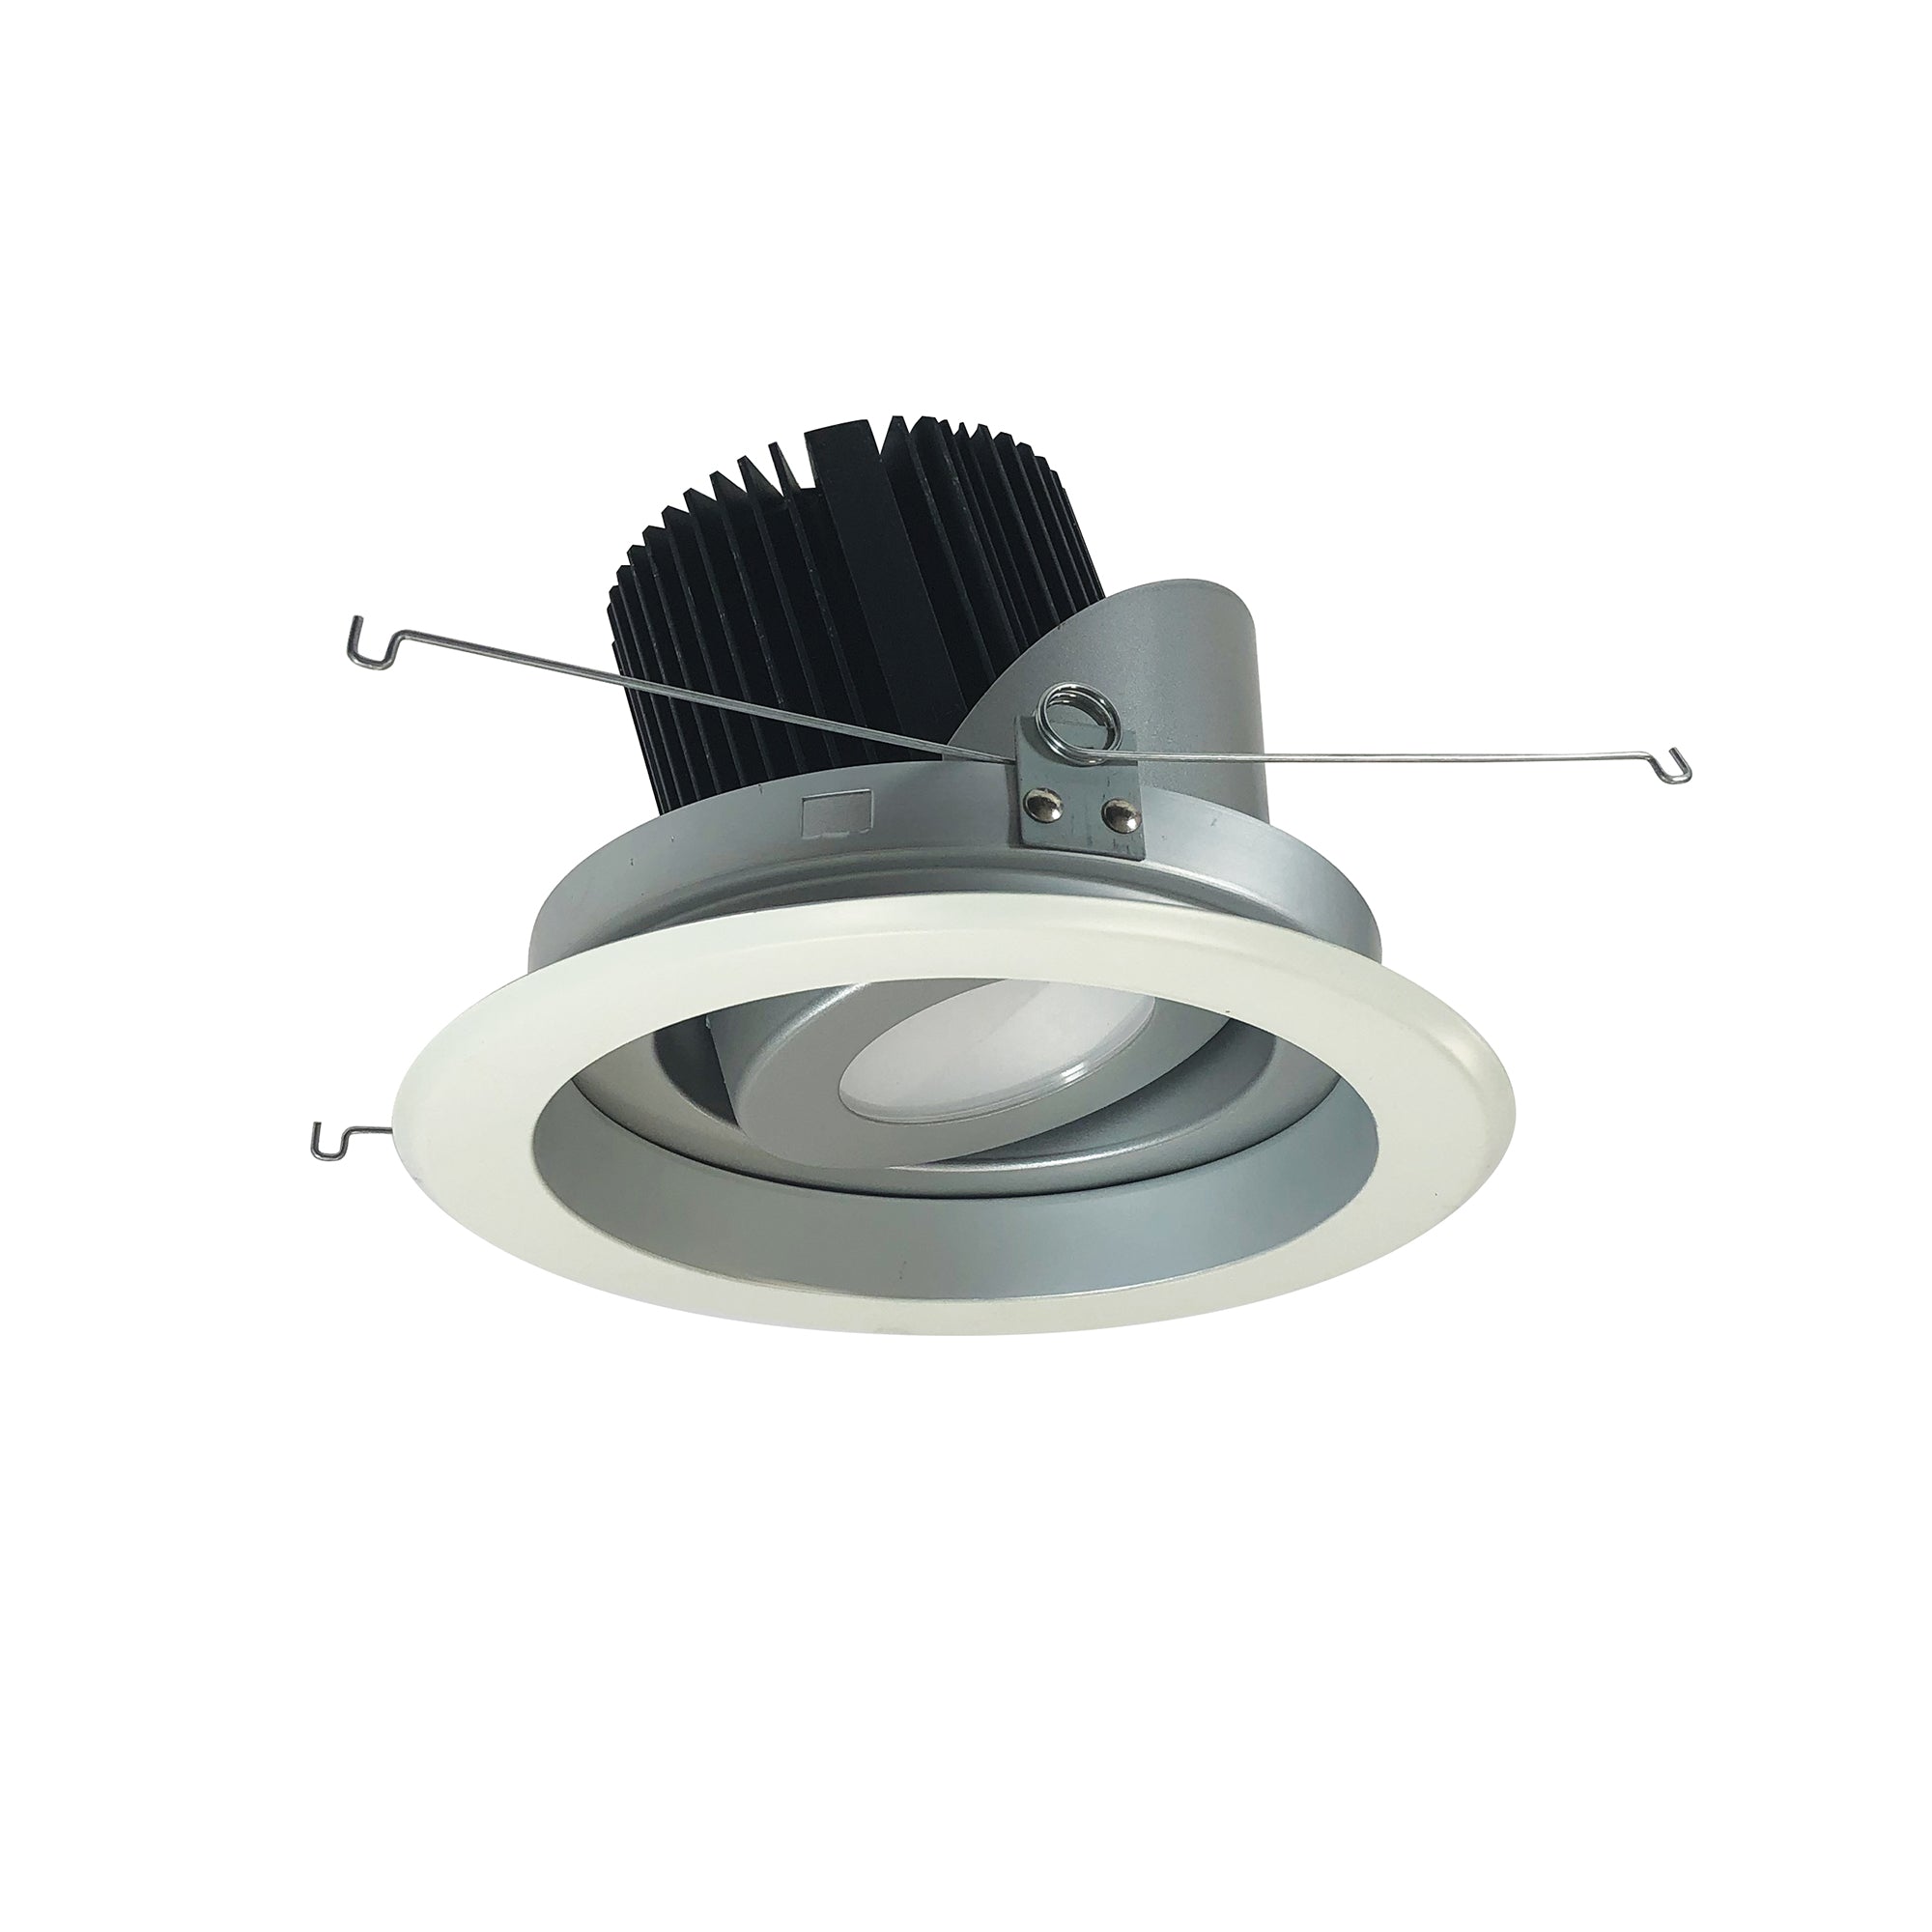 Nora Lighting NRM2-619L2540MHZW - Recessed - 6 Inch Marquise II Round Regressed Adj. Reflector, Medium Flood, 2500lm, 4000K, Haze/White (Not Compatible with NHRM2-625 Housings)